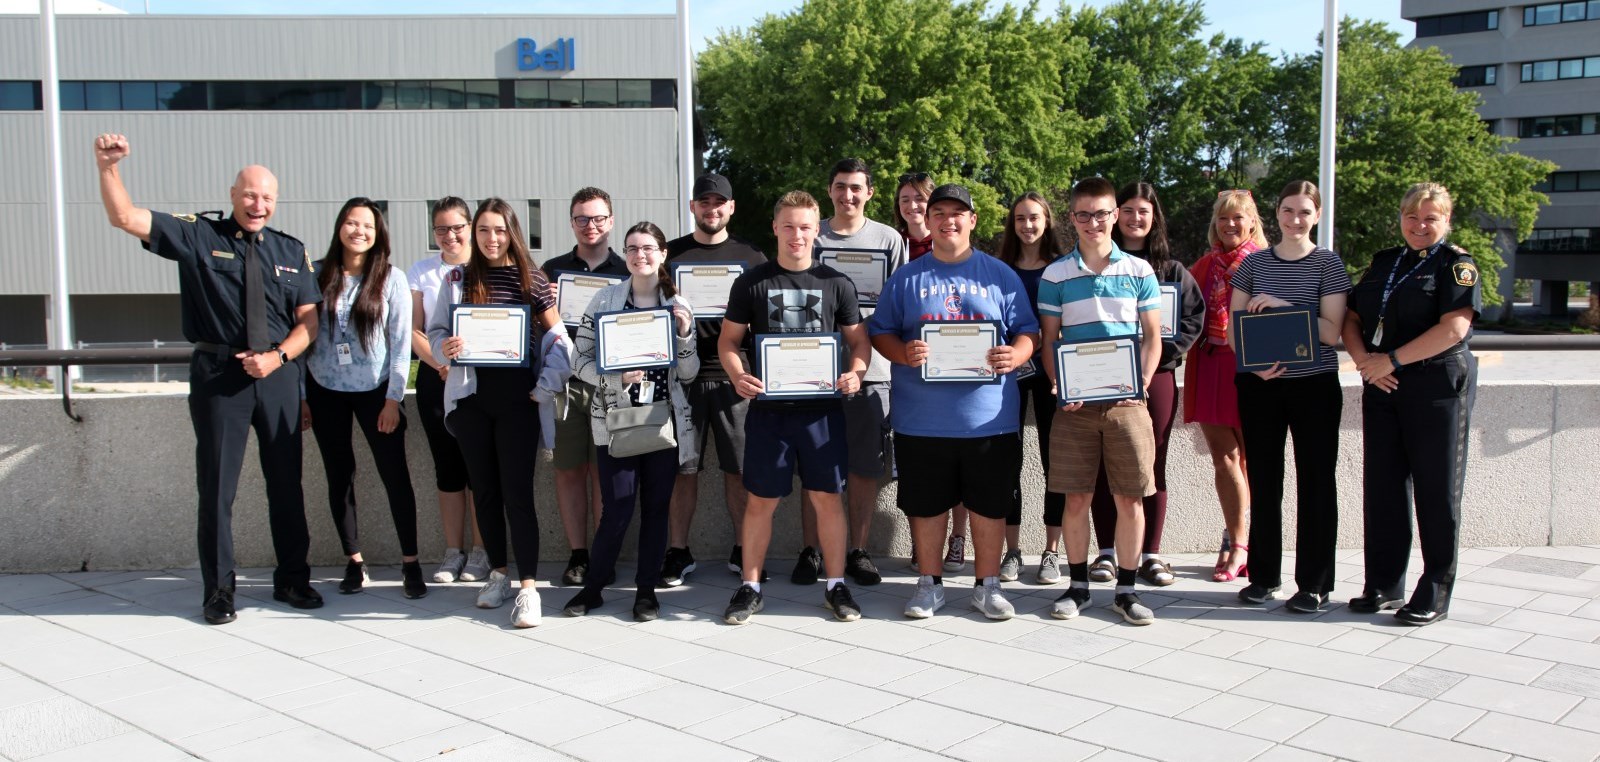 summer students standing with their completion certificates